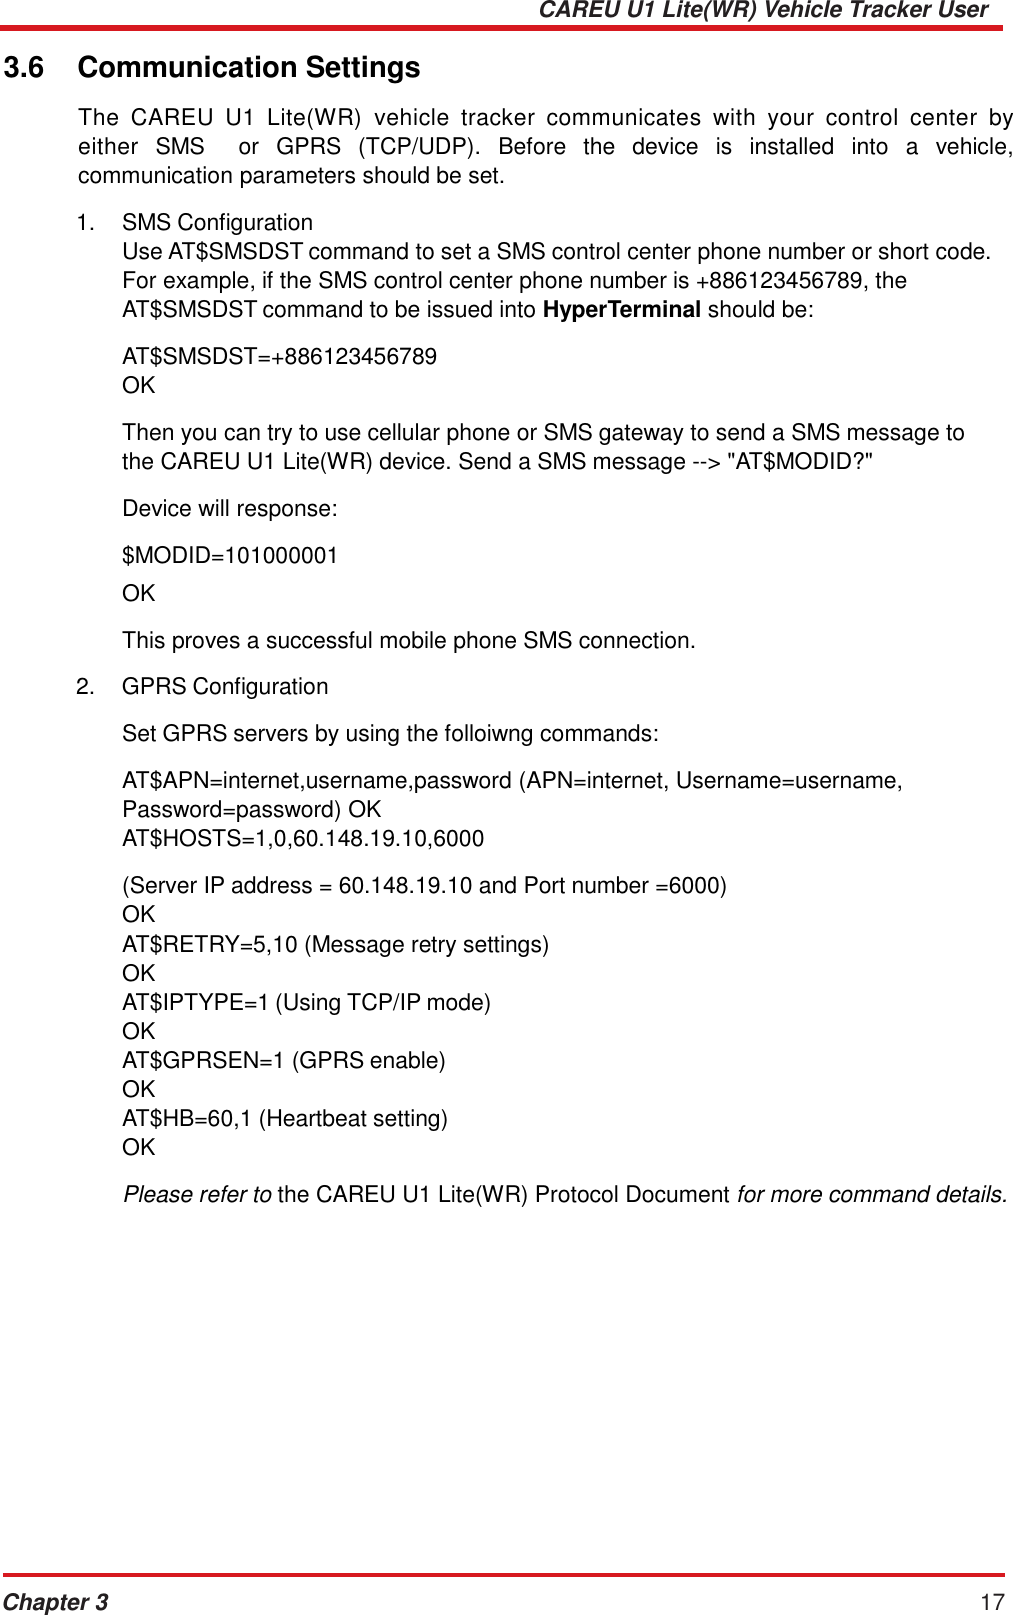 CAREU U1 Lite(WR) Vehicle Tracker User Guide Chapter 3 17    3.6  Communication Settings  The  CAREU  U1  Lite(WR)  vehicle  tracker  communicates  with  your  control  center  by either  SMS    or  GPRS  (TCP/UDP).  Before  the  device  is  installed  into  a  vehicle, communication parameters should be set.  1.    SMS Configuration Use AT$SMSDST command to set a SMS control center phone number or short code. For example, if the SMS control center phone number is +886123456789, the AT$SMSDST command to be issued into HyperTerminal should be:  AT$SMSDST=+886123456789 OK  Then you can try to use cellular phone or SMS gateway to send a SMS message to the CAREU U1 Lite(WR) device. Send a SMS message --&gt; &quot;AT$MODID?&quot;  Device will response:  $MODID=101000001  OK  This proves a successful mobile phone SMS connection.  2.    GPRS Configuration Set GPRS servers by using the folloiwng commands: AT$APN=internet,username,password (APN=internet, Username=username, Password=password) OK AT$HOSTS=1,0,60.148.19.10,6000  (Server IP address = 60.148.19.10 and Port number =6000) OK AT$RETRY=5,10 (Message retry settings) OK AT$IPTYPE=1 (Using TCP/IP mode) OK AT$GPRSEN=1 (GPRS enable) OK AT$HB=60,1 (Heartbeat setting) OK  Please refer to the CAREU U1 Lite(WR) Protocol Document for more command details. 